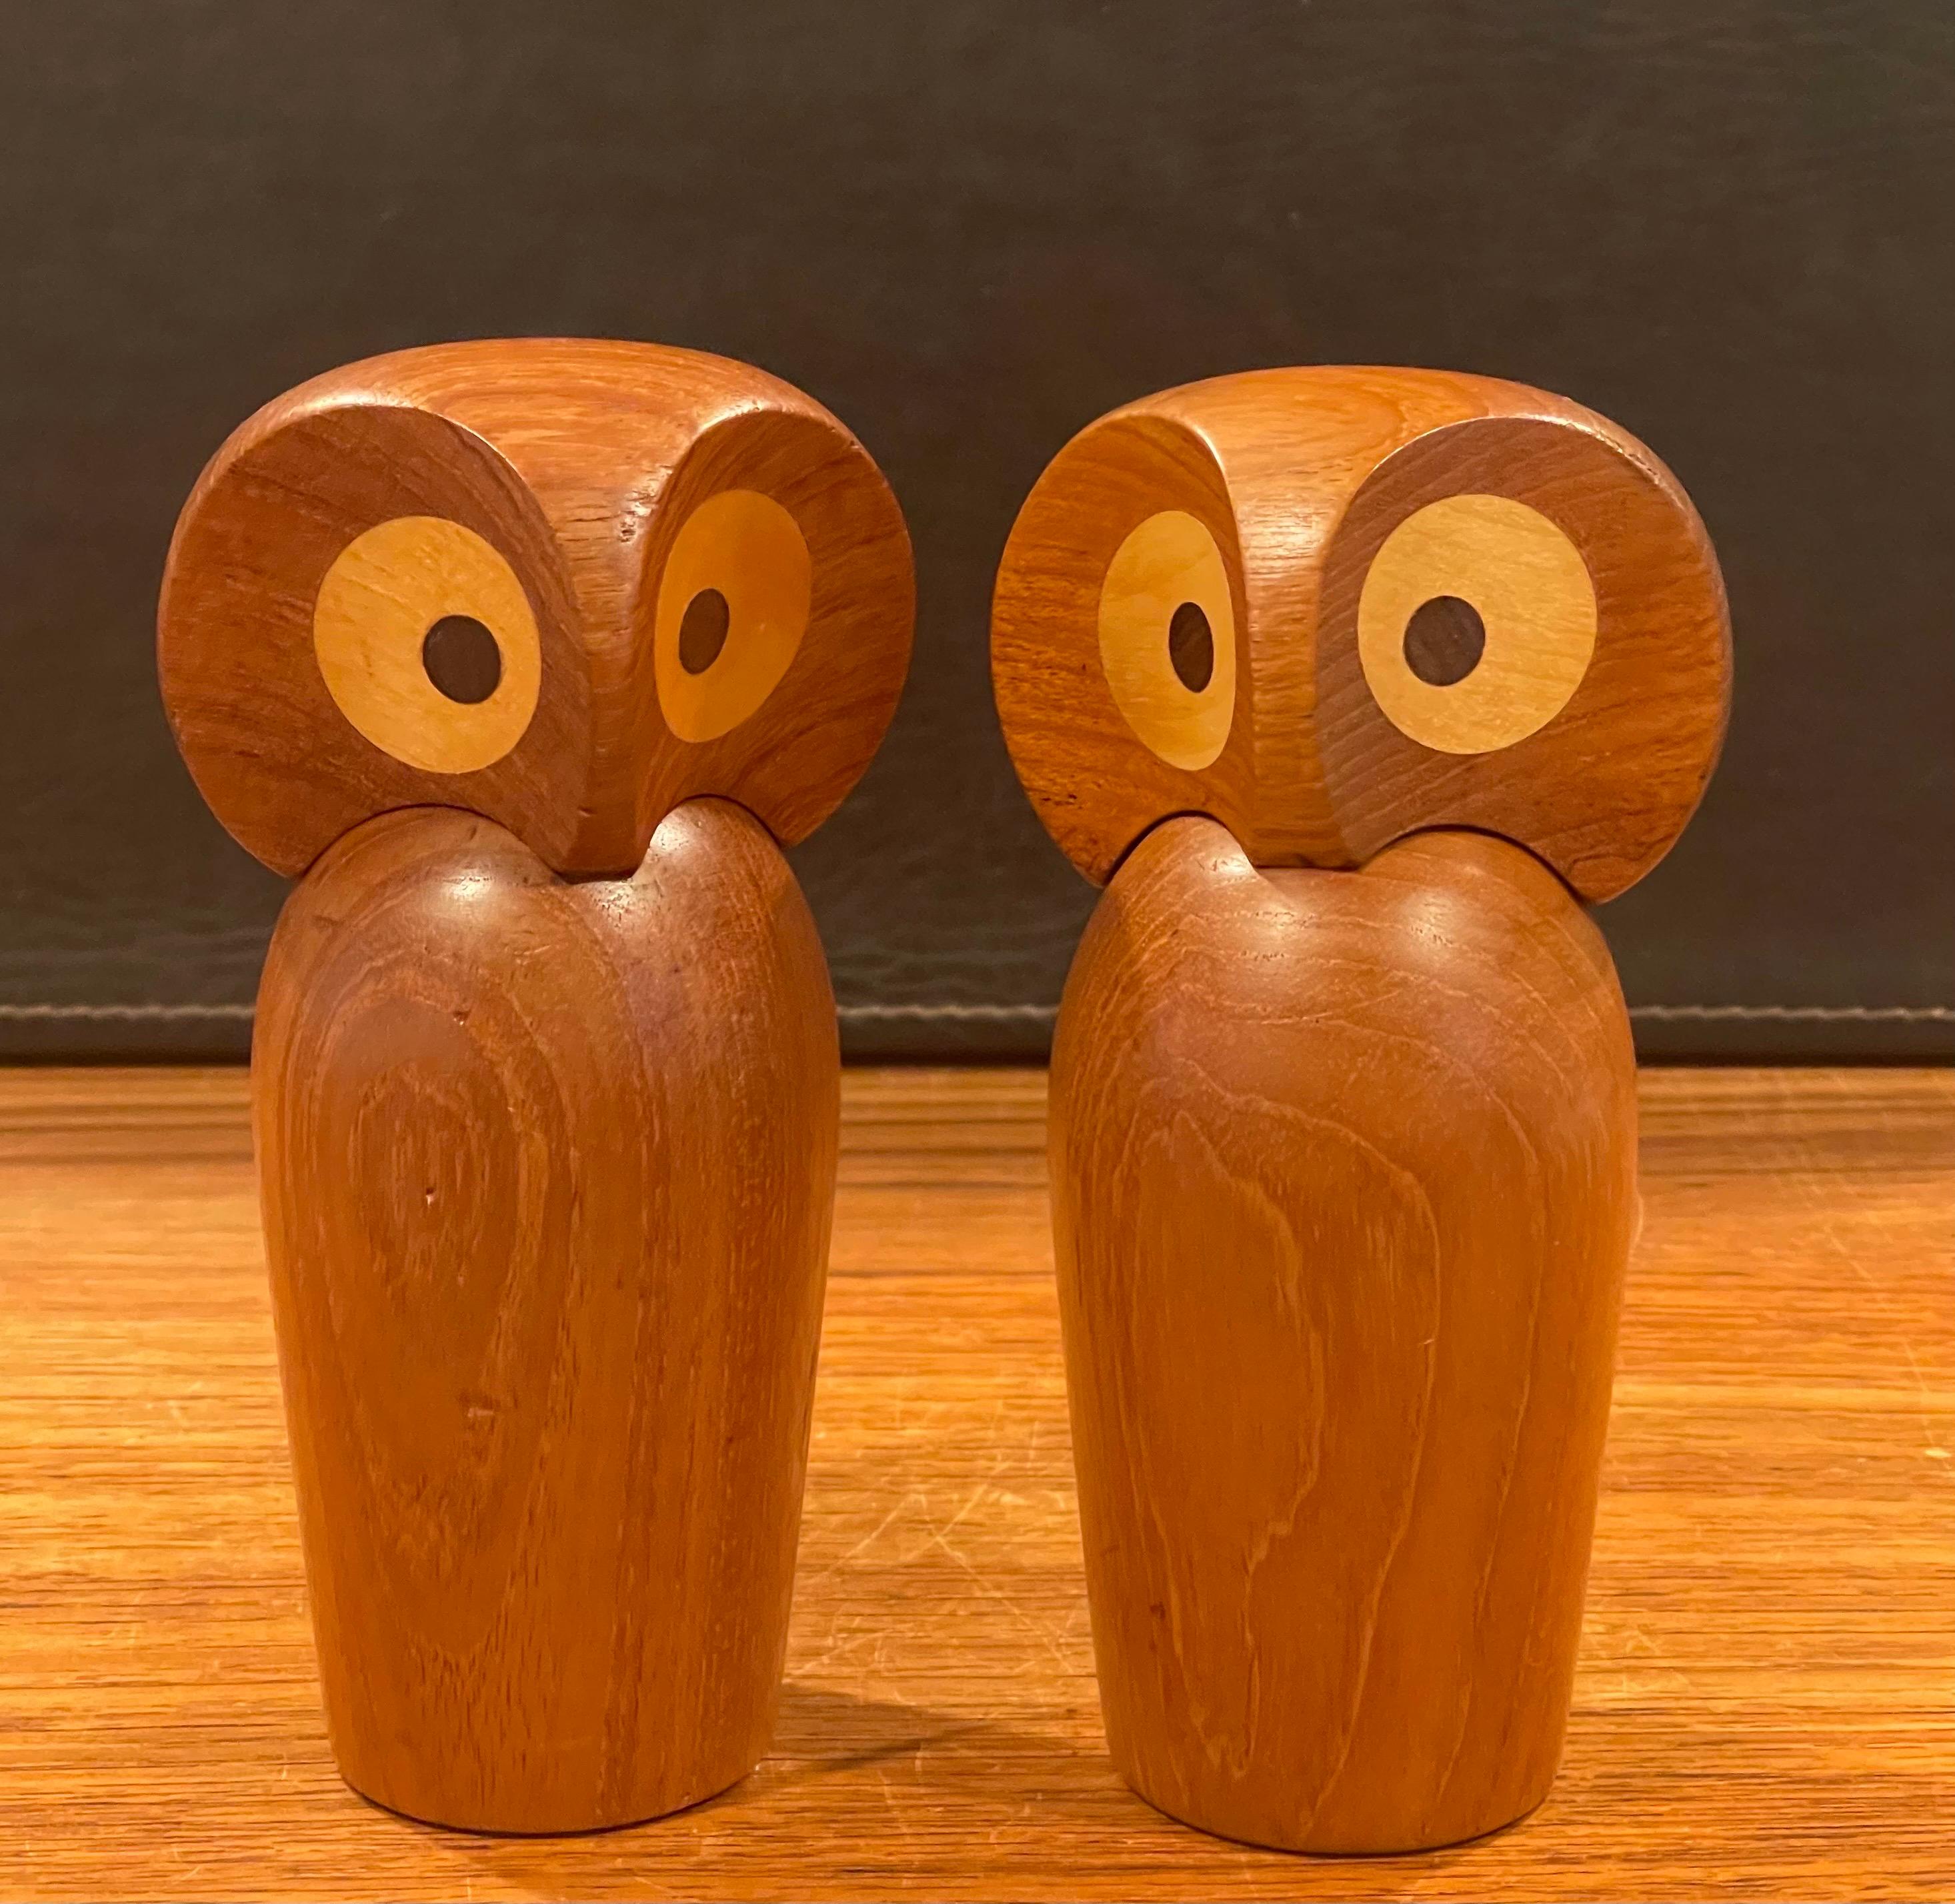 Rare pair of MCM teak owl sculptures with posable heads by Skjode Skjern of Denmark, circa 1950s. The owls are finely crafted and made of teak with walnut and oak inset eyes. The head is seperate piece and can rotate like a real owl. The set is in